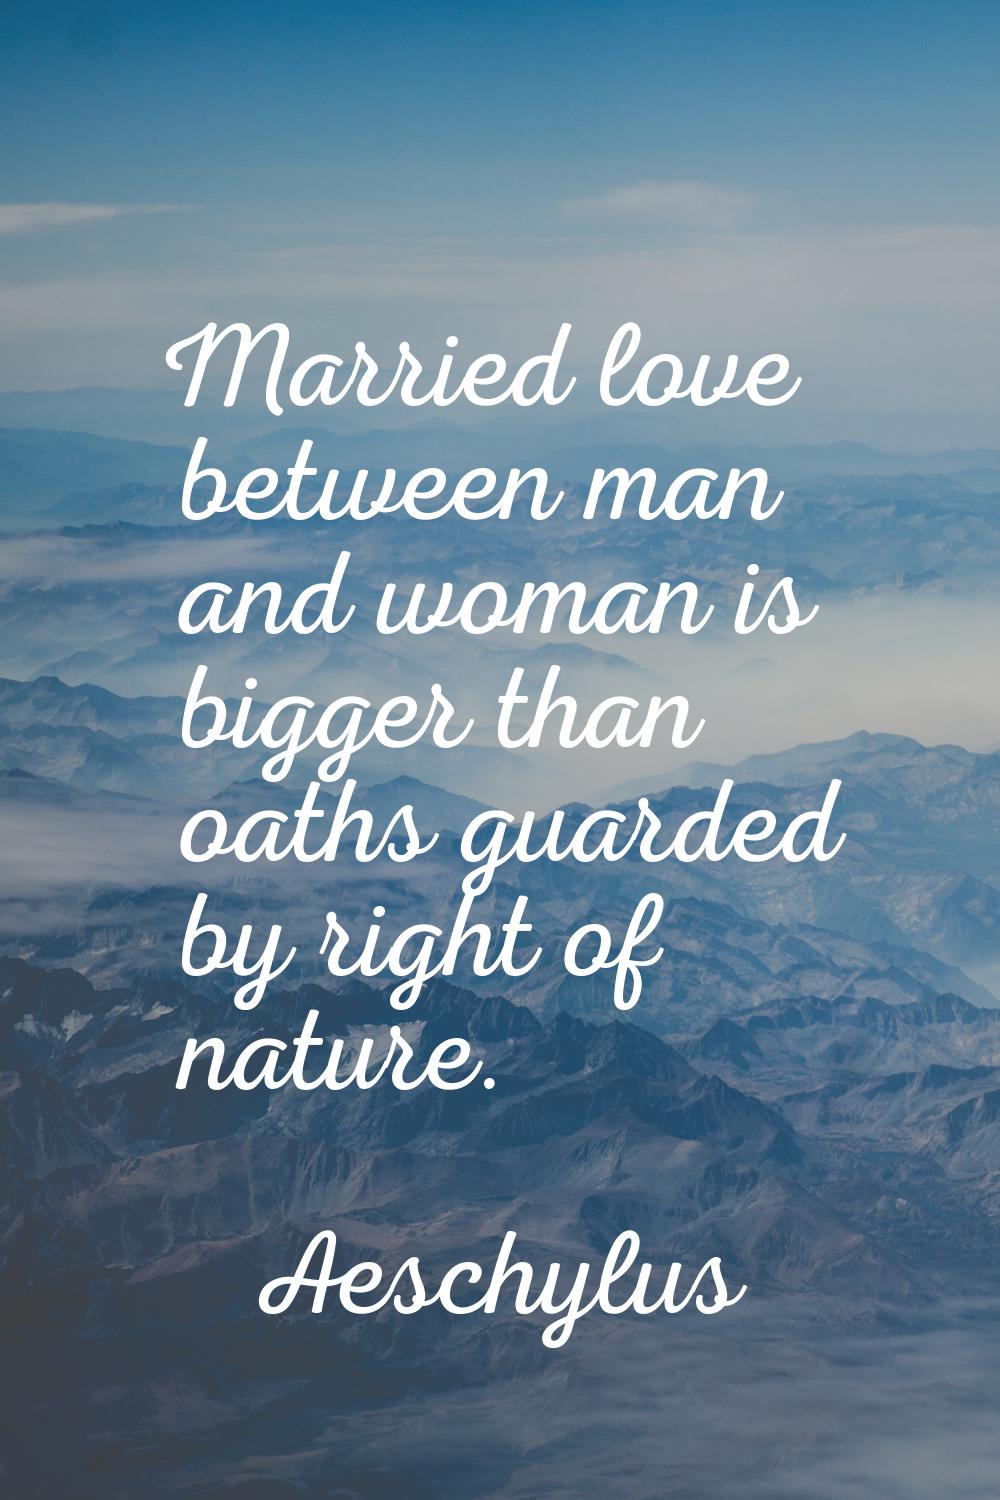 Married love between man and woman is bigger than oaths guarded by right of nature.